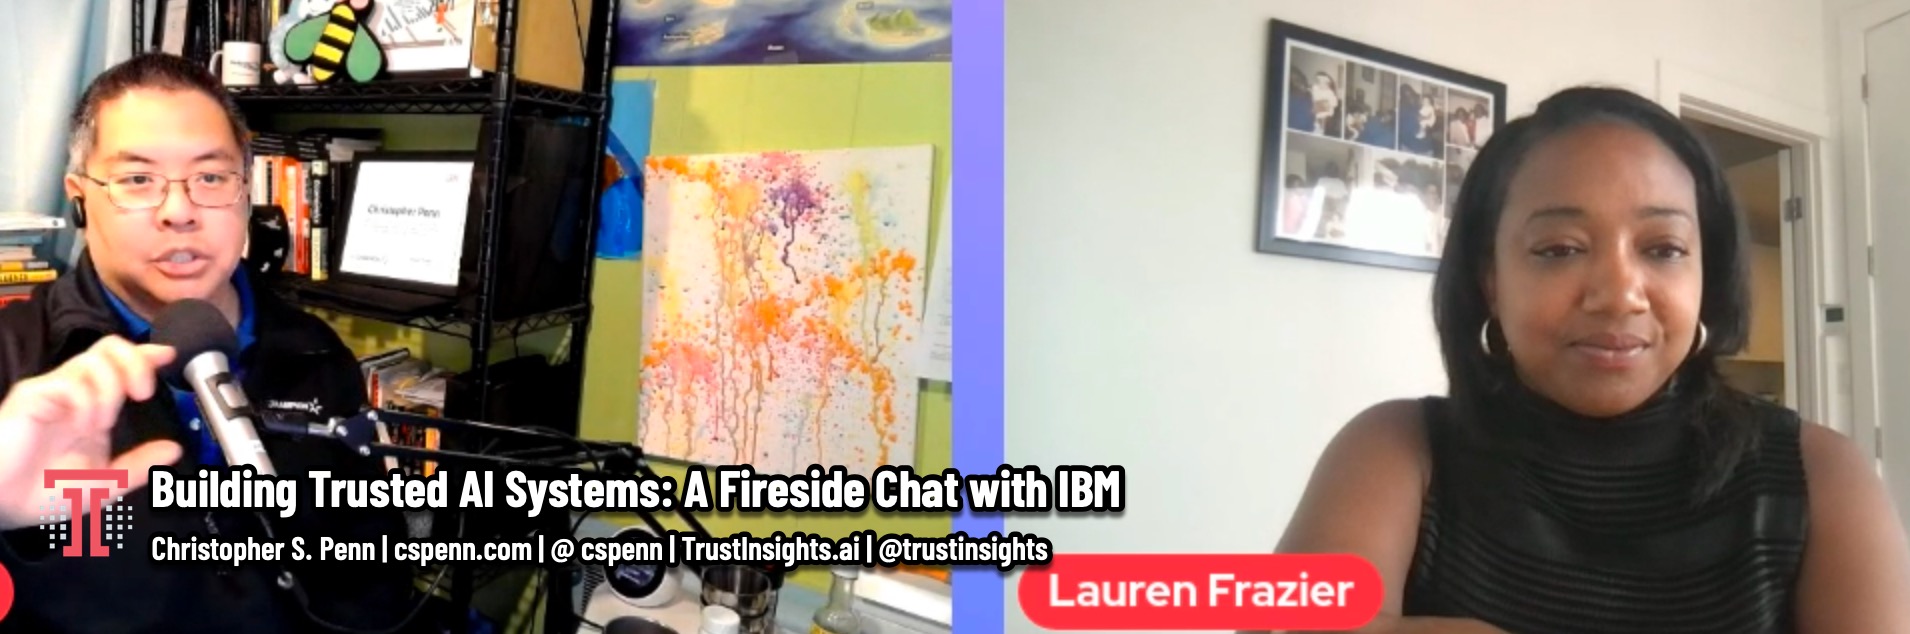 Building Trusted AI Systems: A Fireside Chat with IBM